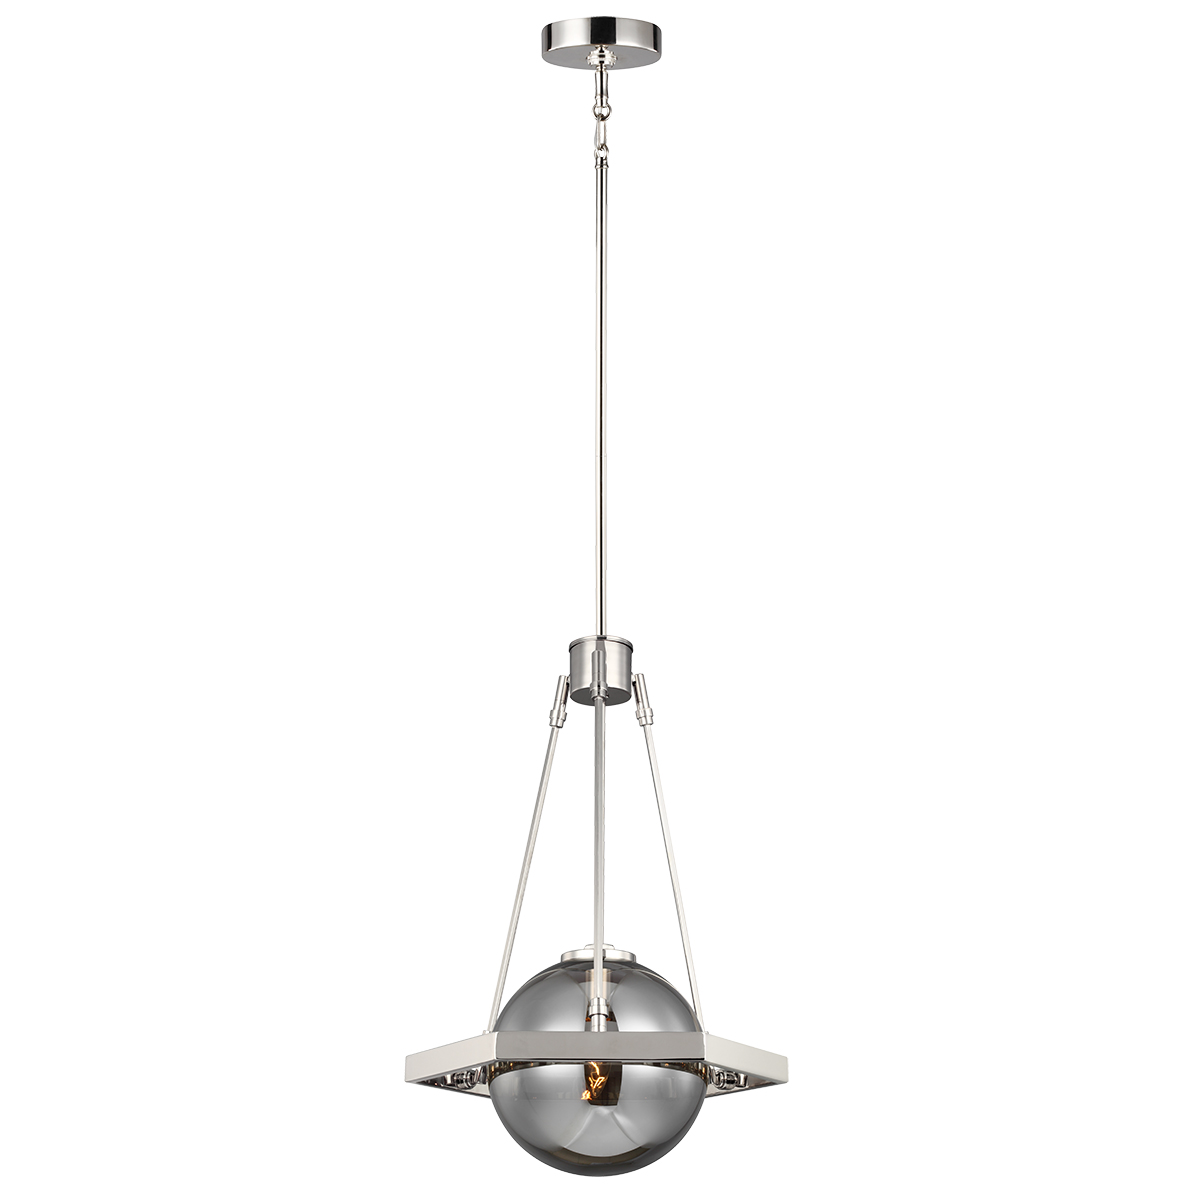 Image of Quintiesse QN-HARPER-1P Harper Industrial Ceiling Pendant Light In Polished Nickel With Smoked Glass